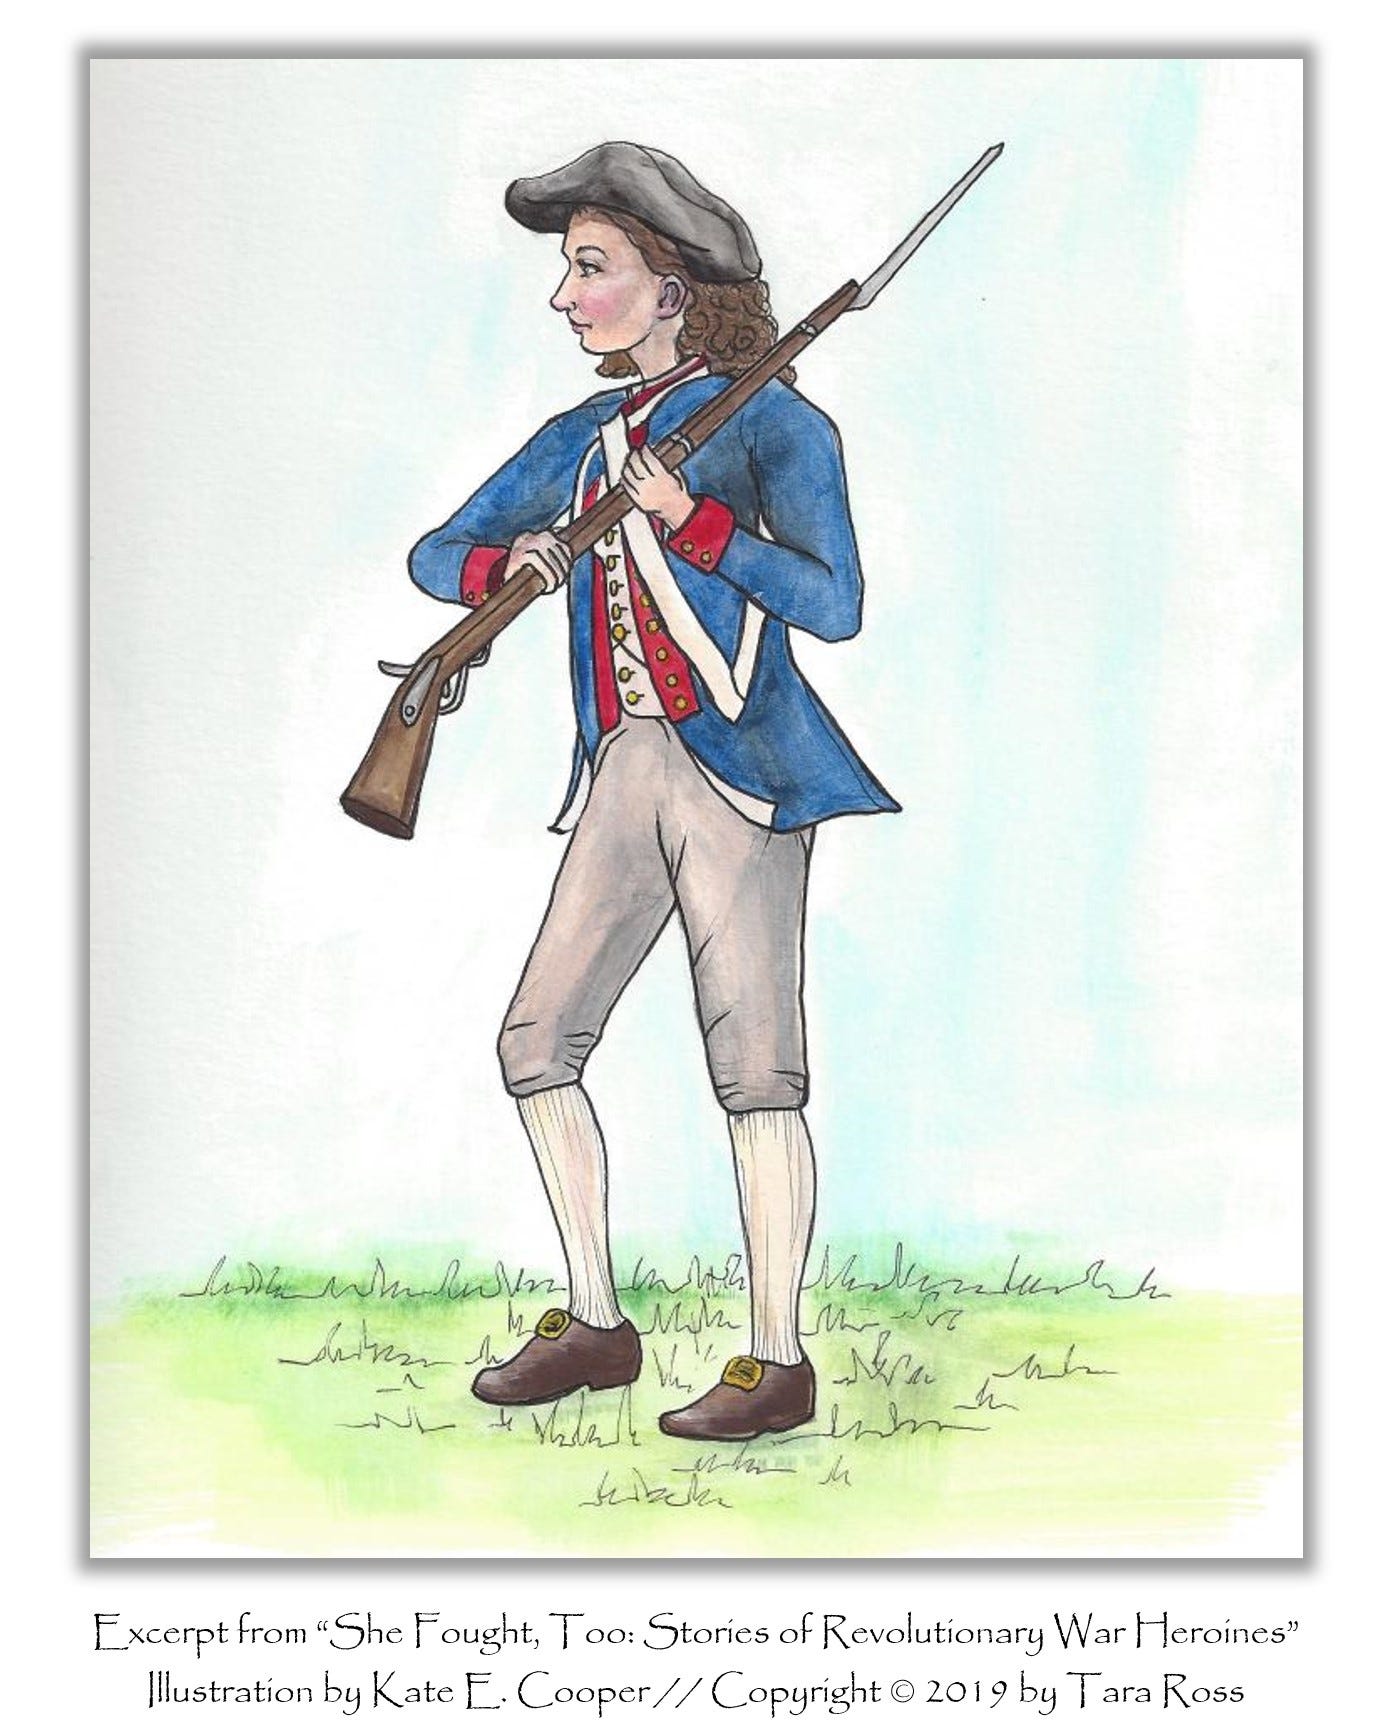 Illustration from "She Fought, Too" by Tara Ross; illustration by Kate E. Cooper.  It depicts a woman dressed as a soldier.